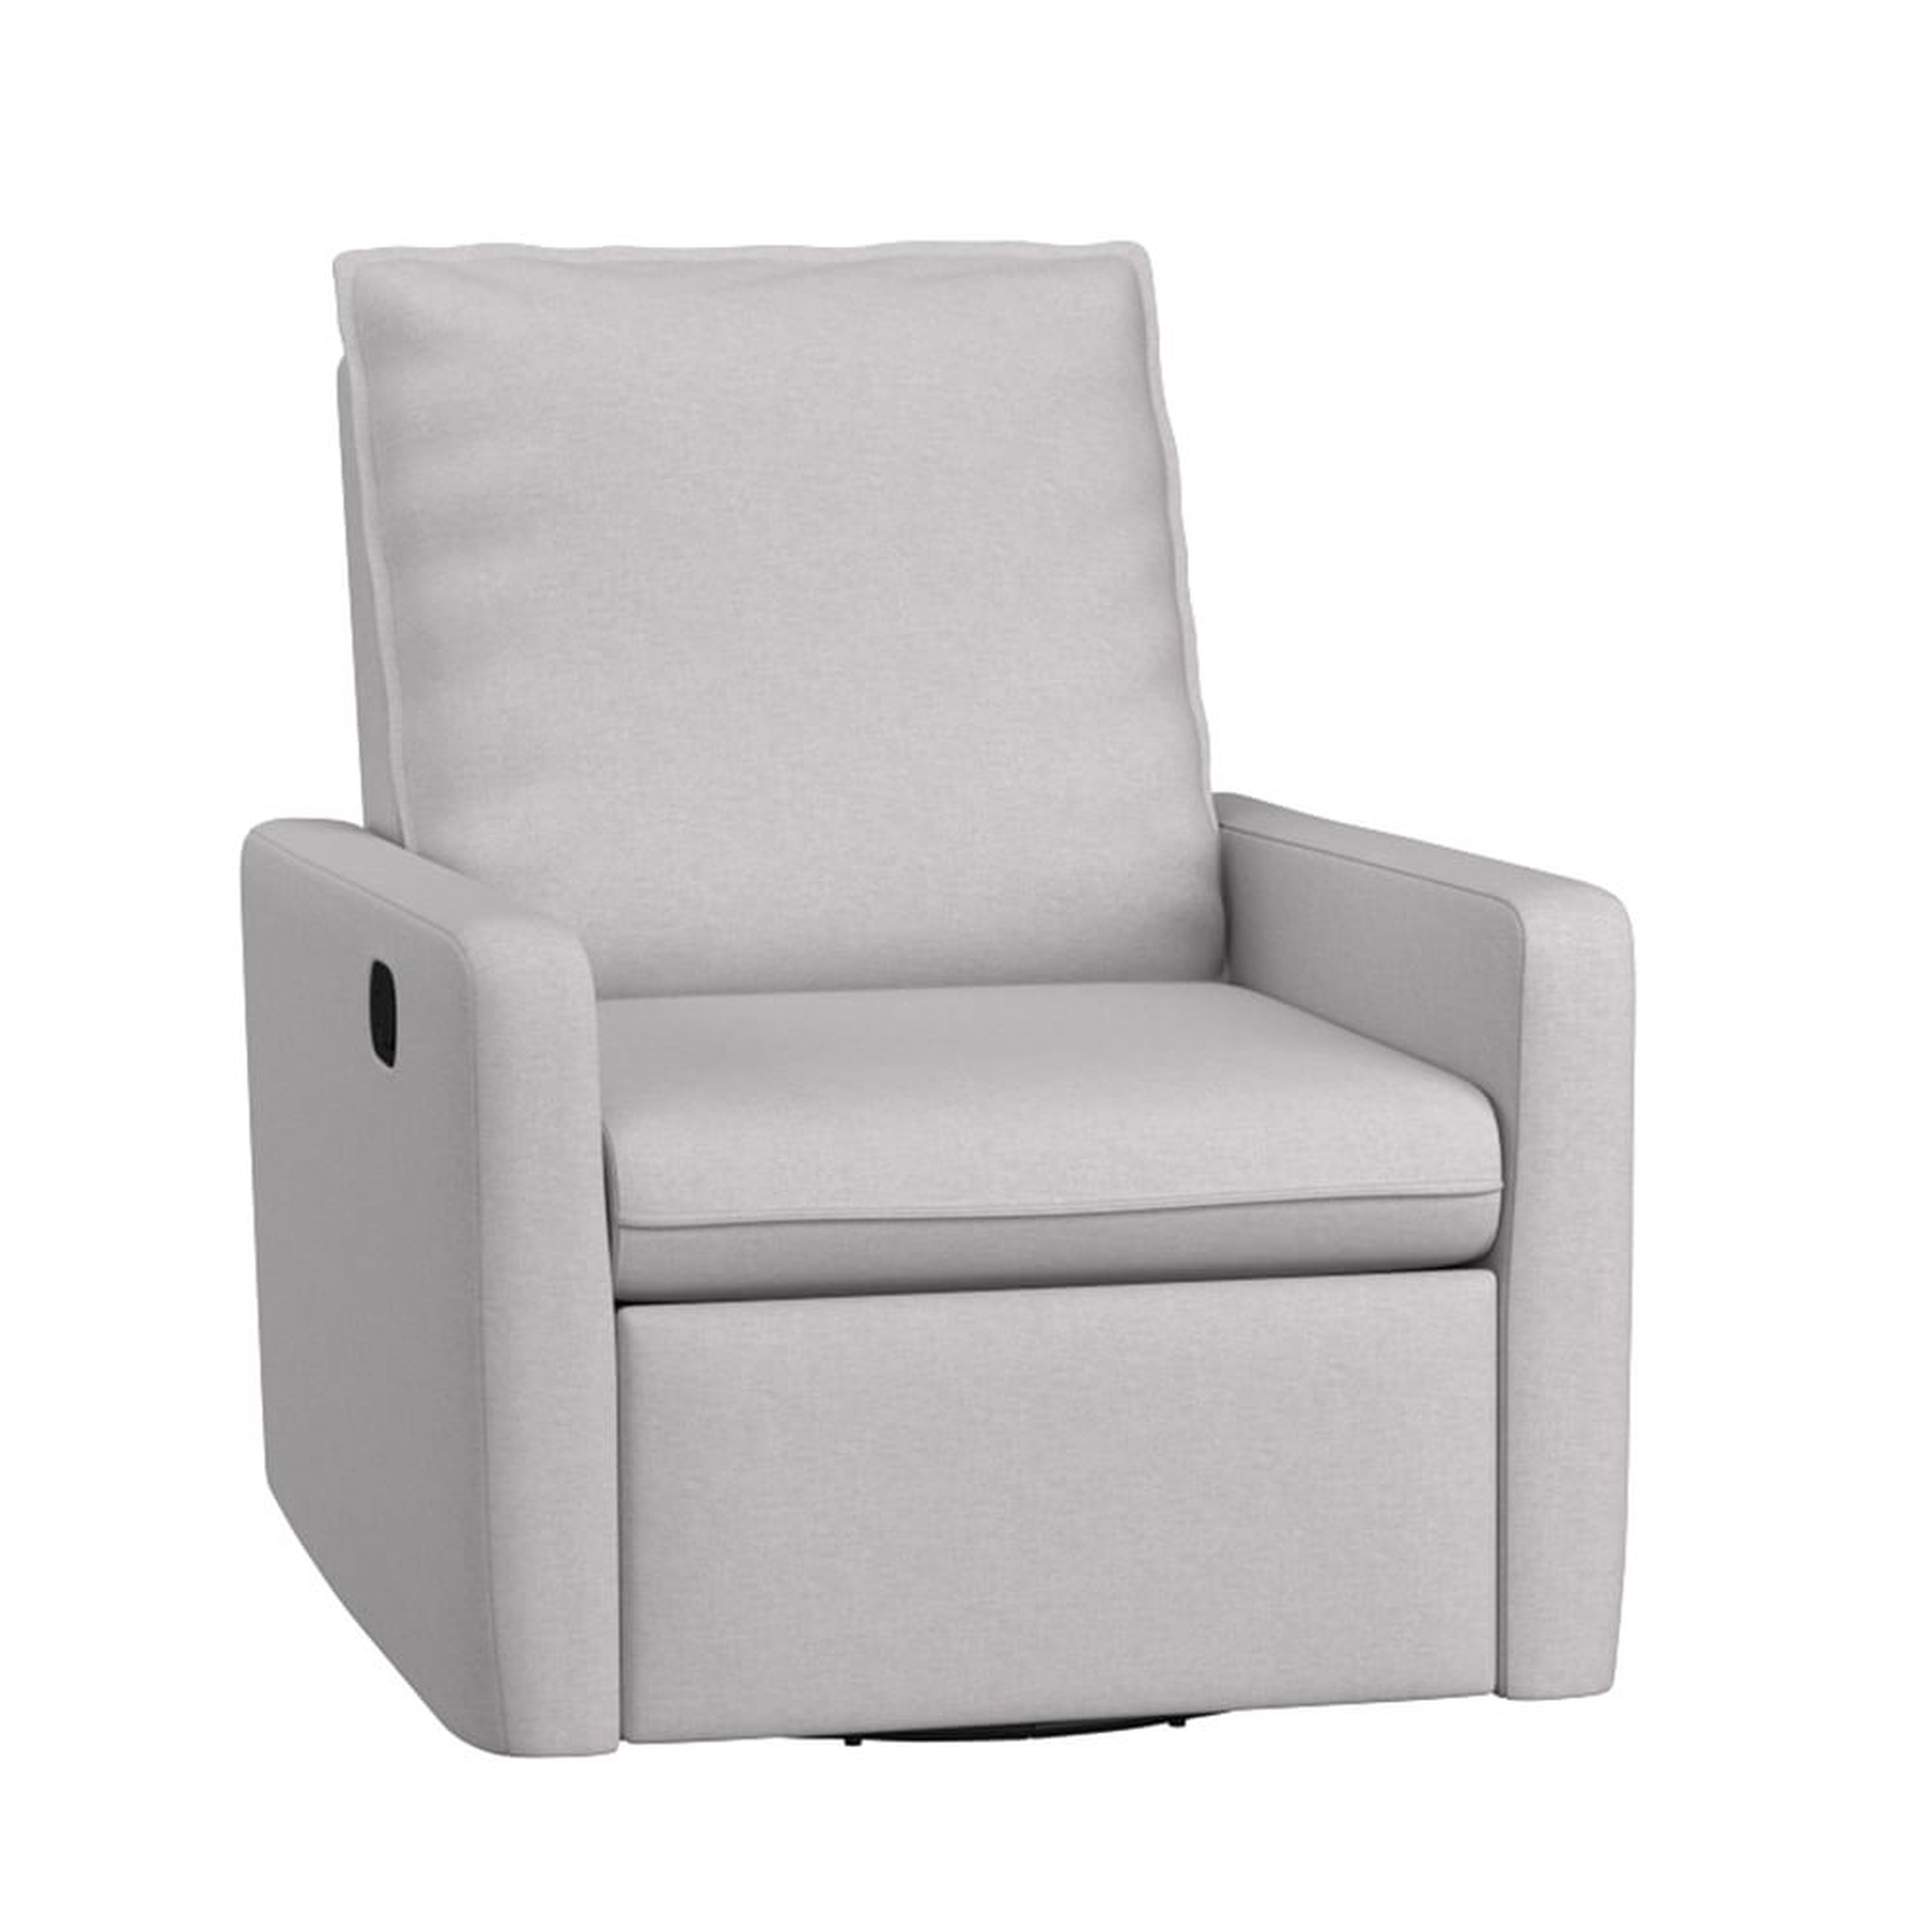 Paxton Swivel Glider and Recliner,Brushed Crossweave, Light Gray, WE Kids - West Elm